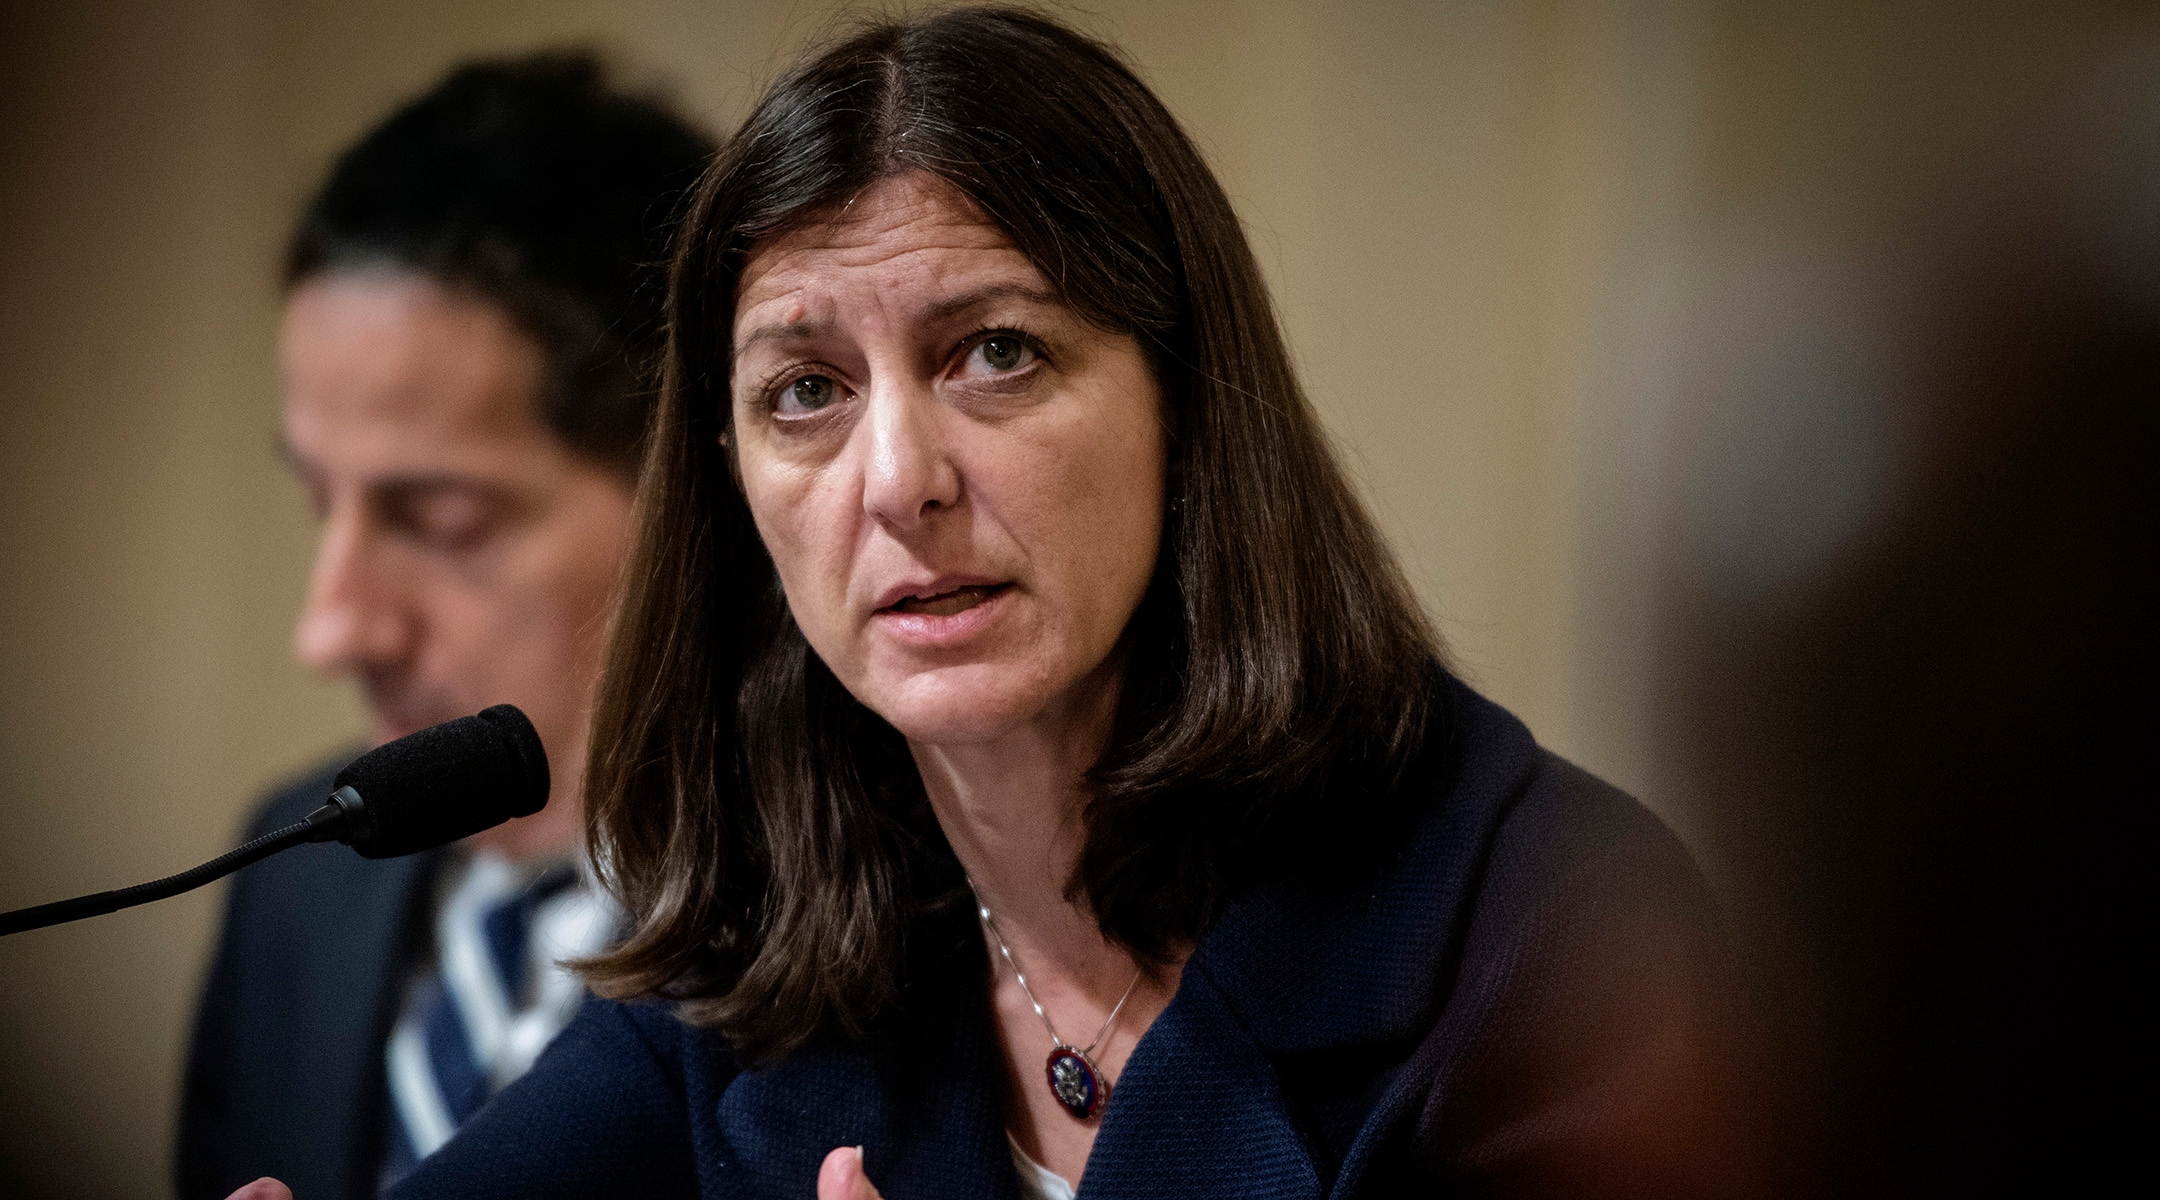 Rep. Elaine Luria questions a witness during the House Select Committee hearing investigating the January 6 attack on US Capitol in Washington, D.C., July 27, 2021. (Bill O’Leary-Pool/Getty Images)